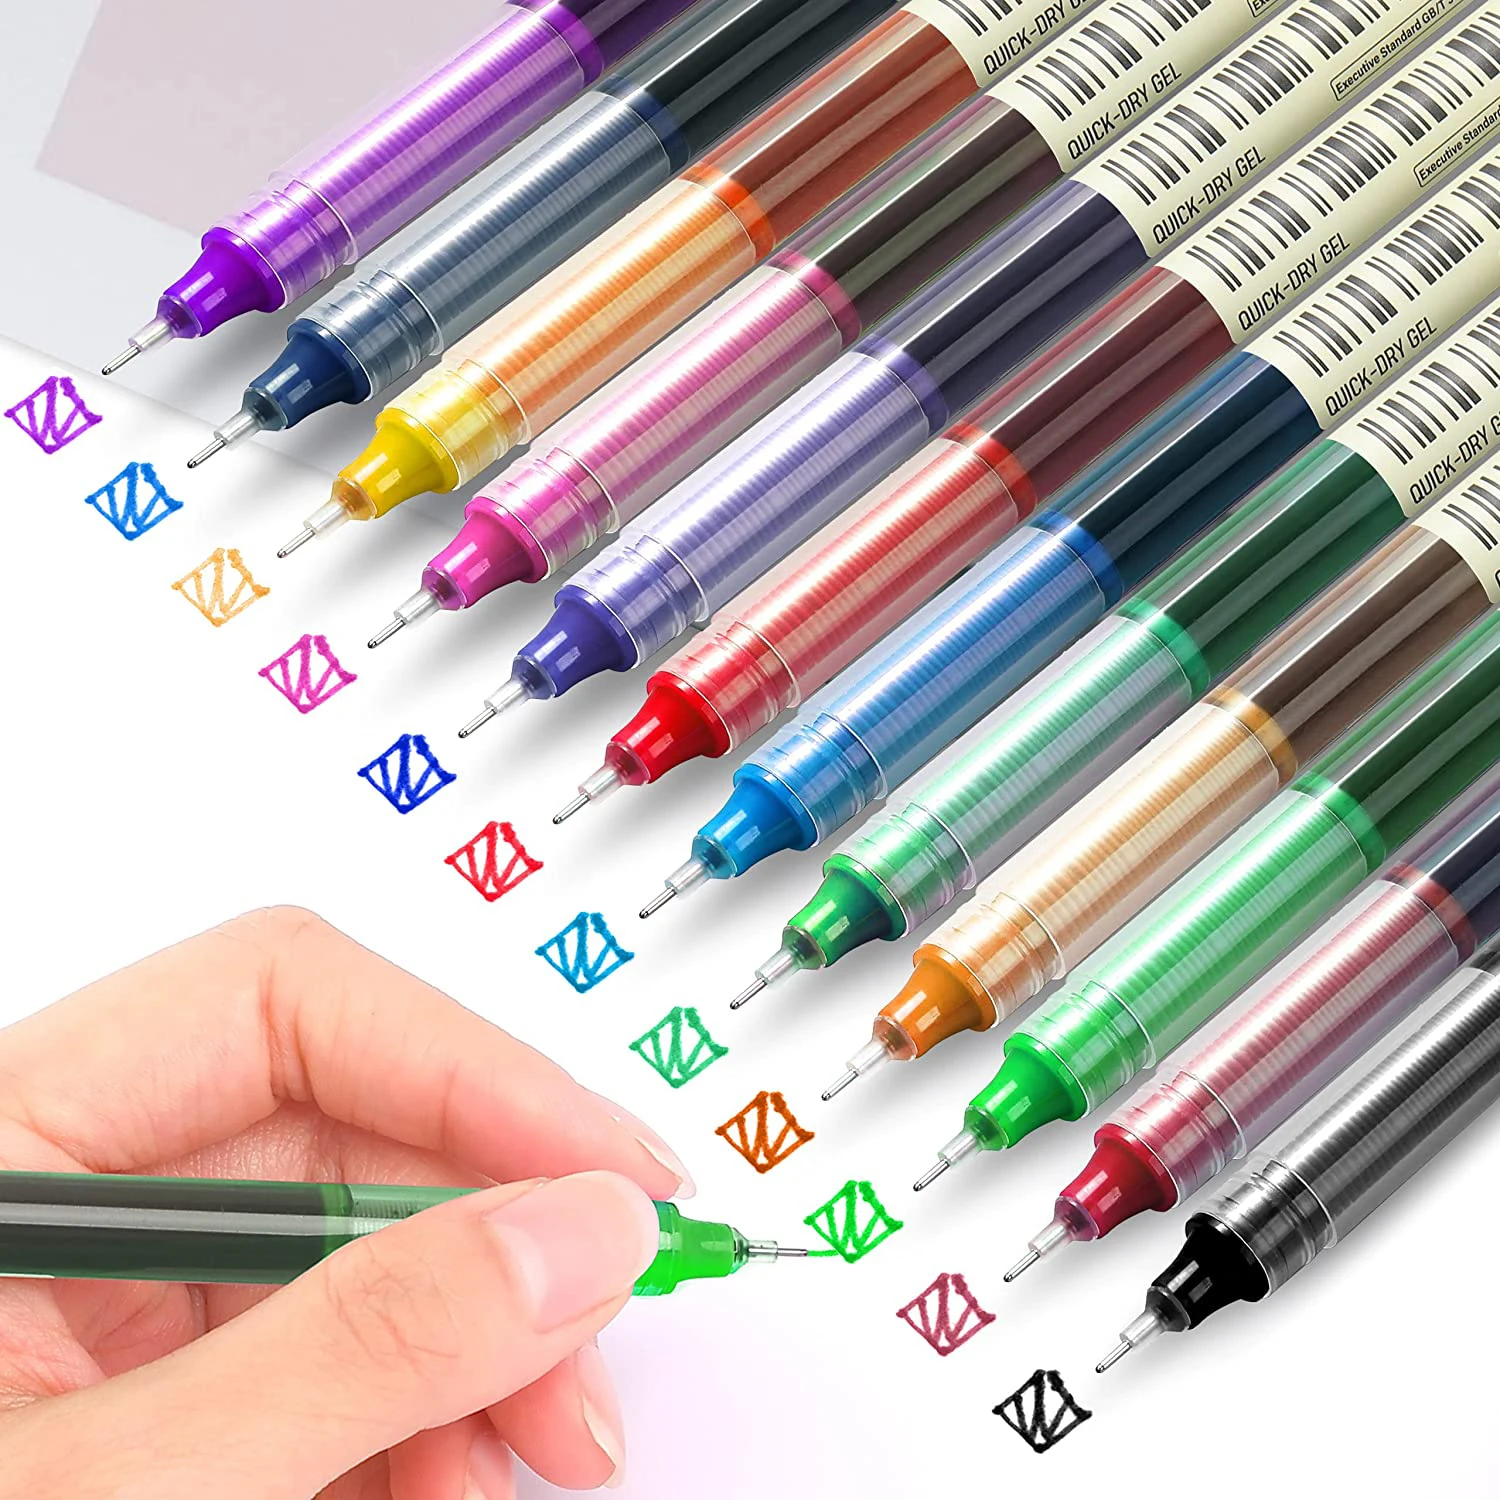 

Rolling Ball Pen 12Pcs Assorted Coloring Quick Drying Ink 0.5mm Fine Point Liquid Multicolored Pen for Journaling Smooth Writing